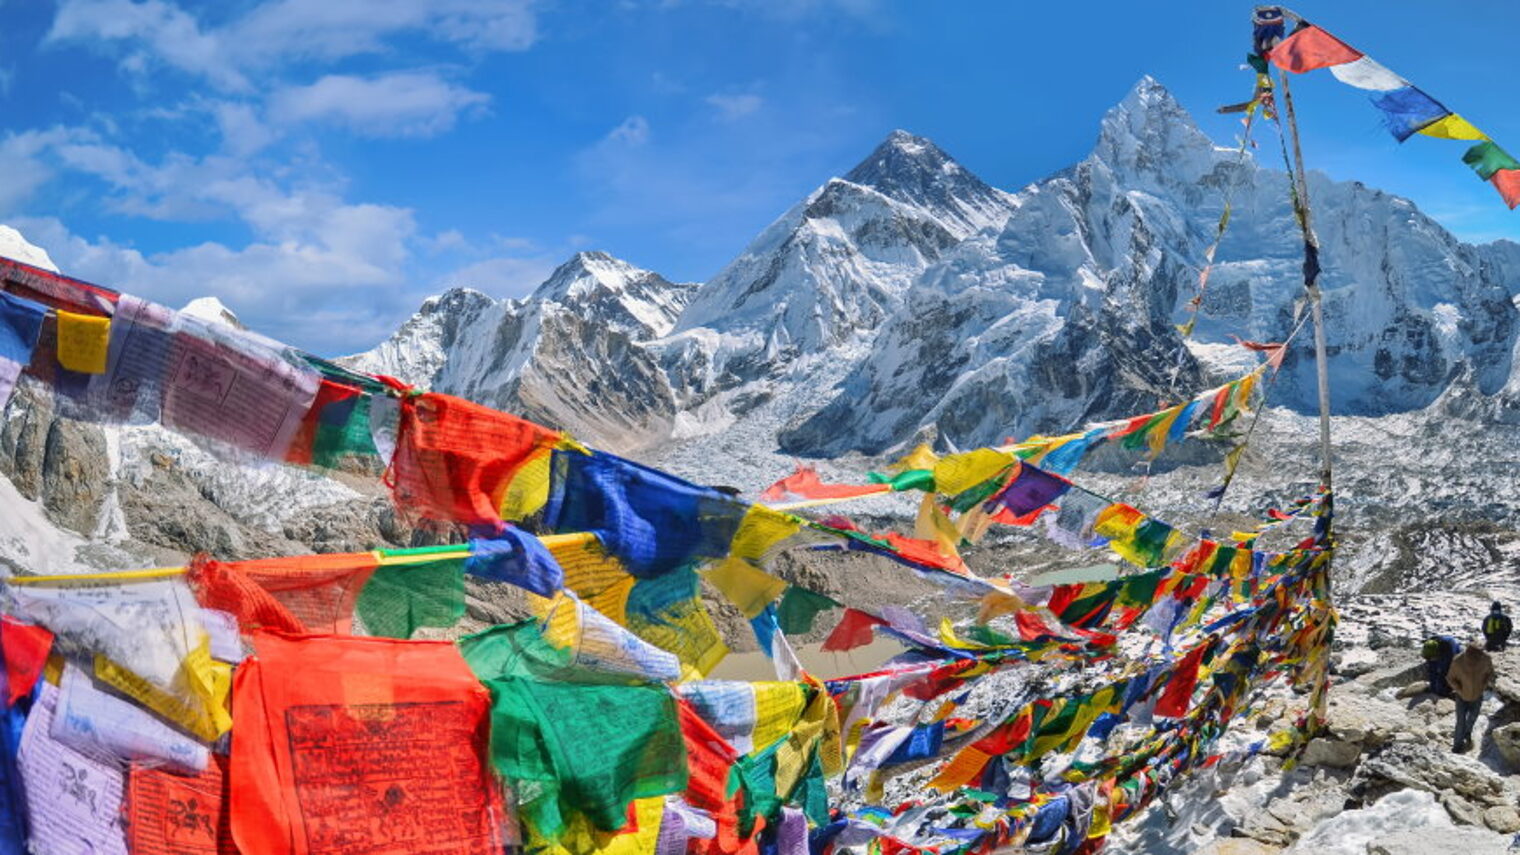 View of Mount Everest and Nuptse with buddhist prayer flags from kala patthar in Sagarmatha National Park in the Nepal Himalaya Schlagwort(e): nepal, everest, mountain, top, travel, outdoor, hill, hiking, adventure, hike, activity, view, trekking, tourist, lifestyle, high, sky, extreme, journey, sport, landscape, beautifully, travel, landmark, mount, kala, patthar, national, summit, himalaya, khumbu, ice, nuptse, sagarmatha, lhotse, tibet, camp, base, glacier, ice, rock, asia, famous, sagarmatha, prayer, prayer flag, flags, people, tourists, person, panoramic, snow, icefall